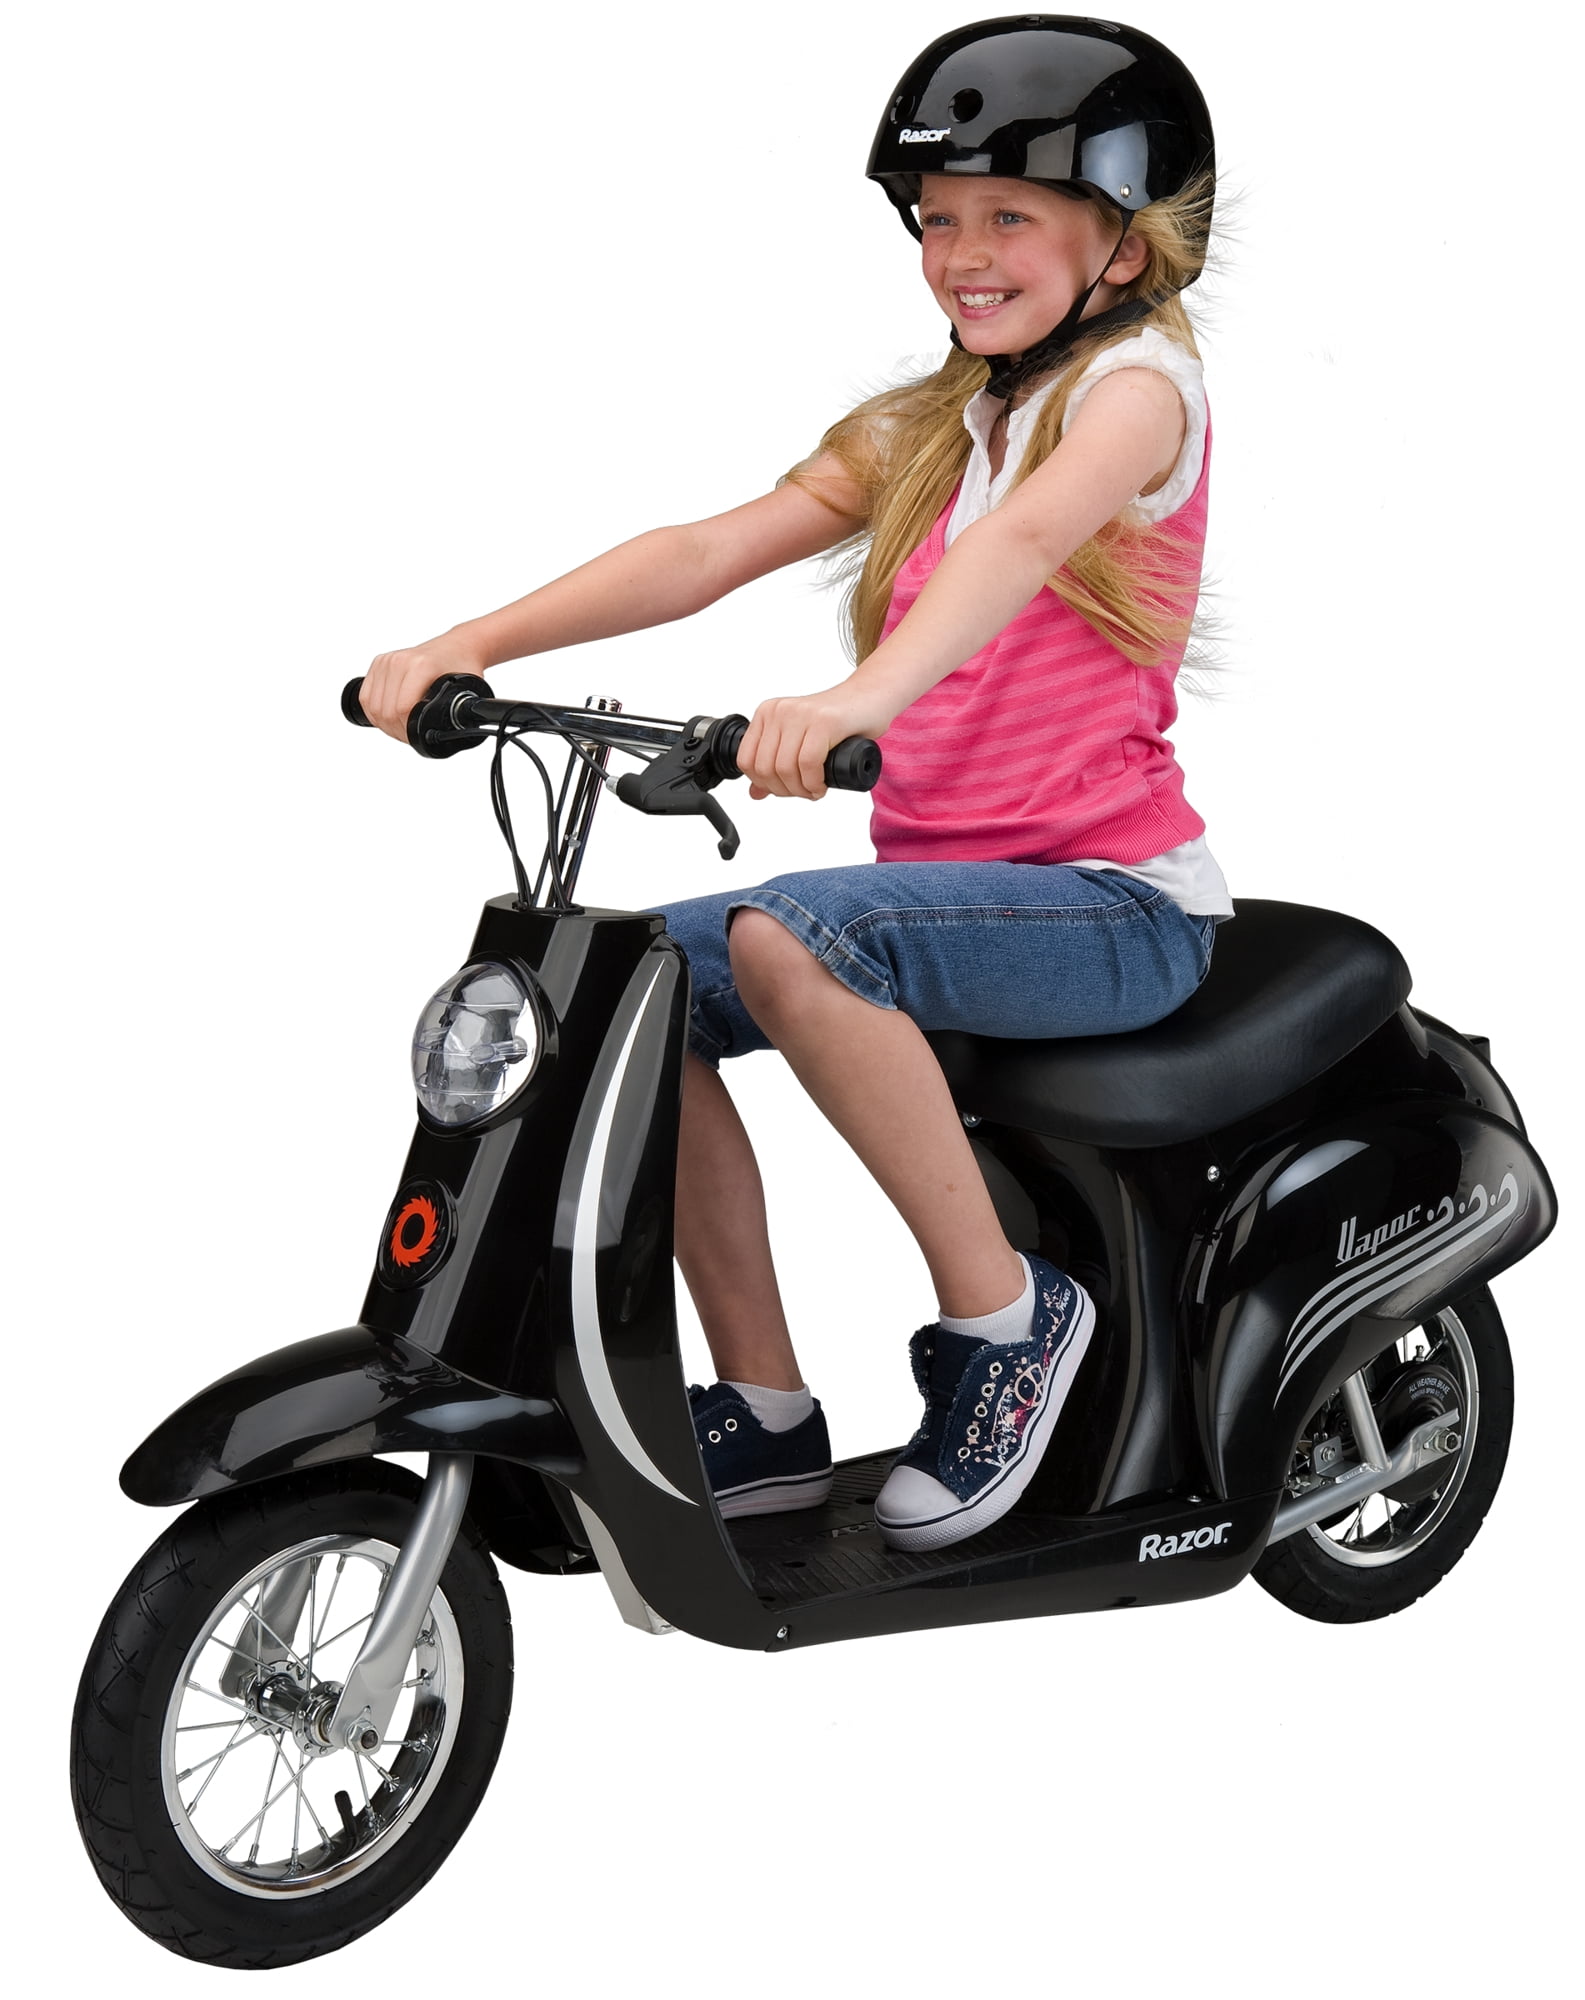 scooter for a 12 year old